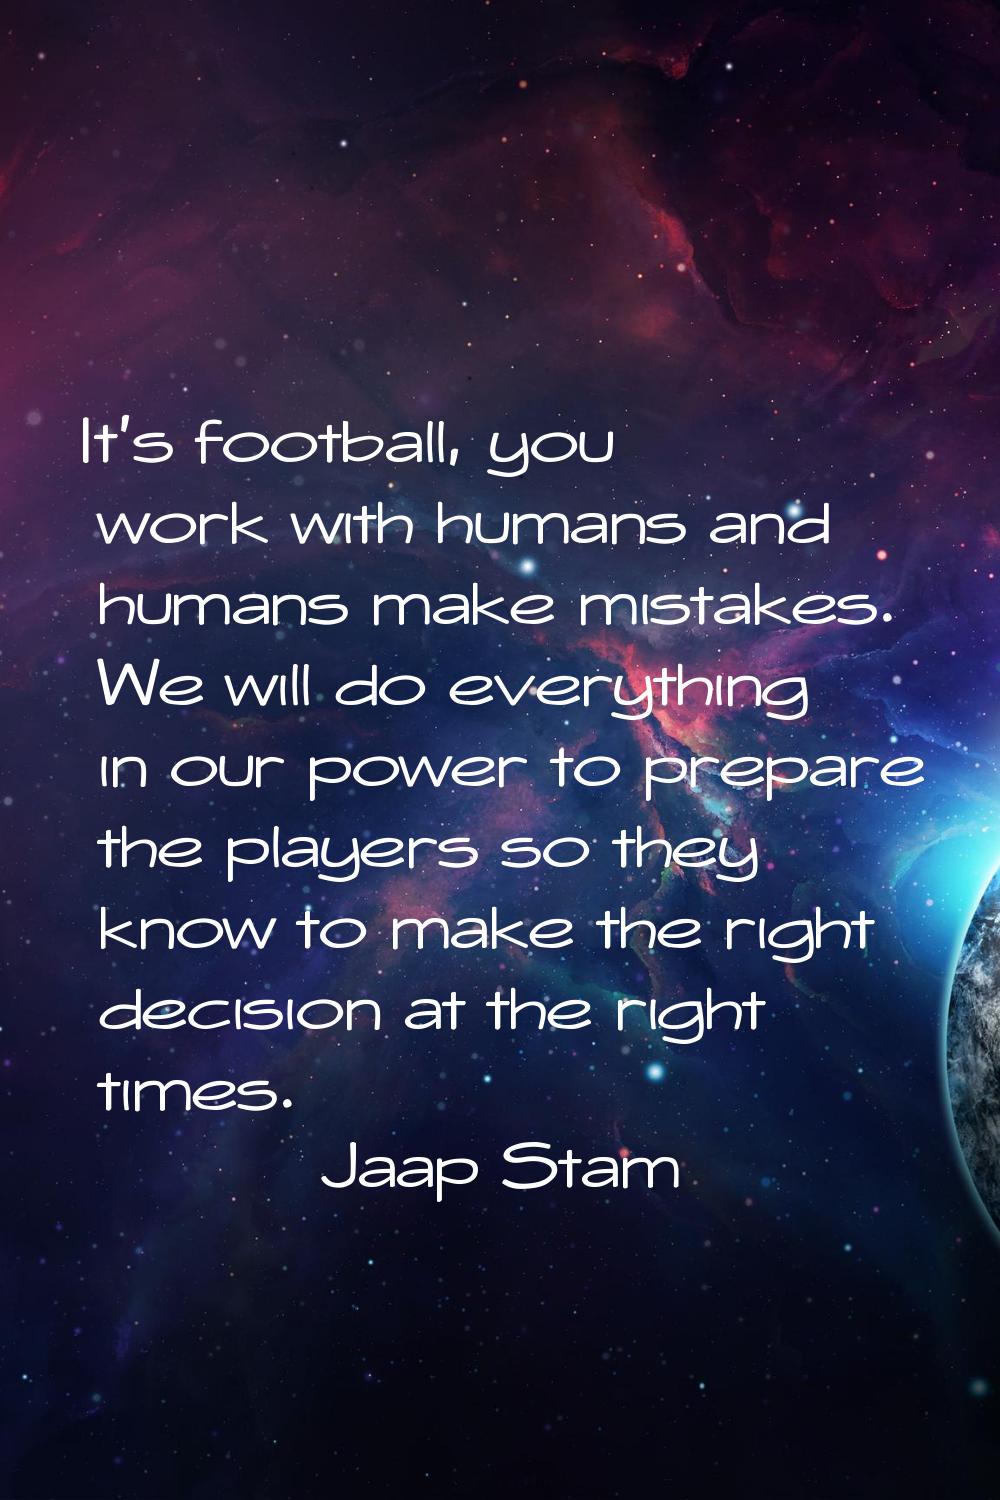 It's football, you work with humans and humans make mistakes. We will do everything in our power to